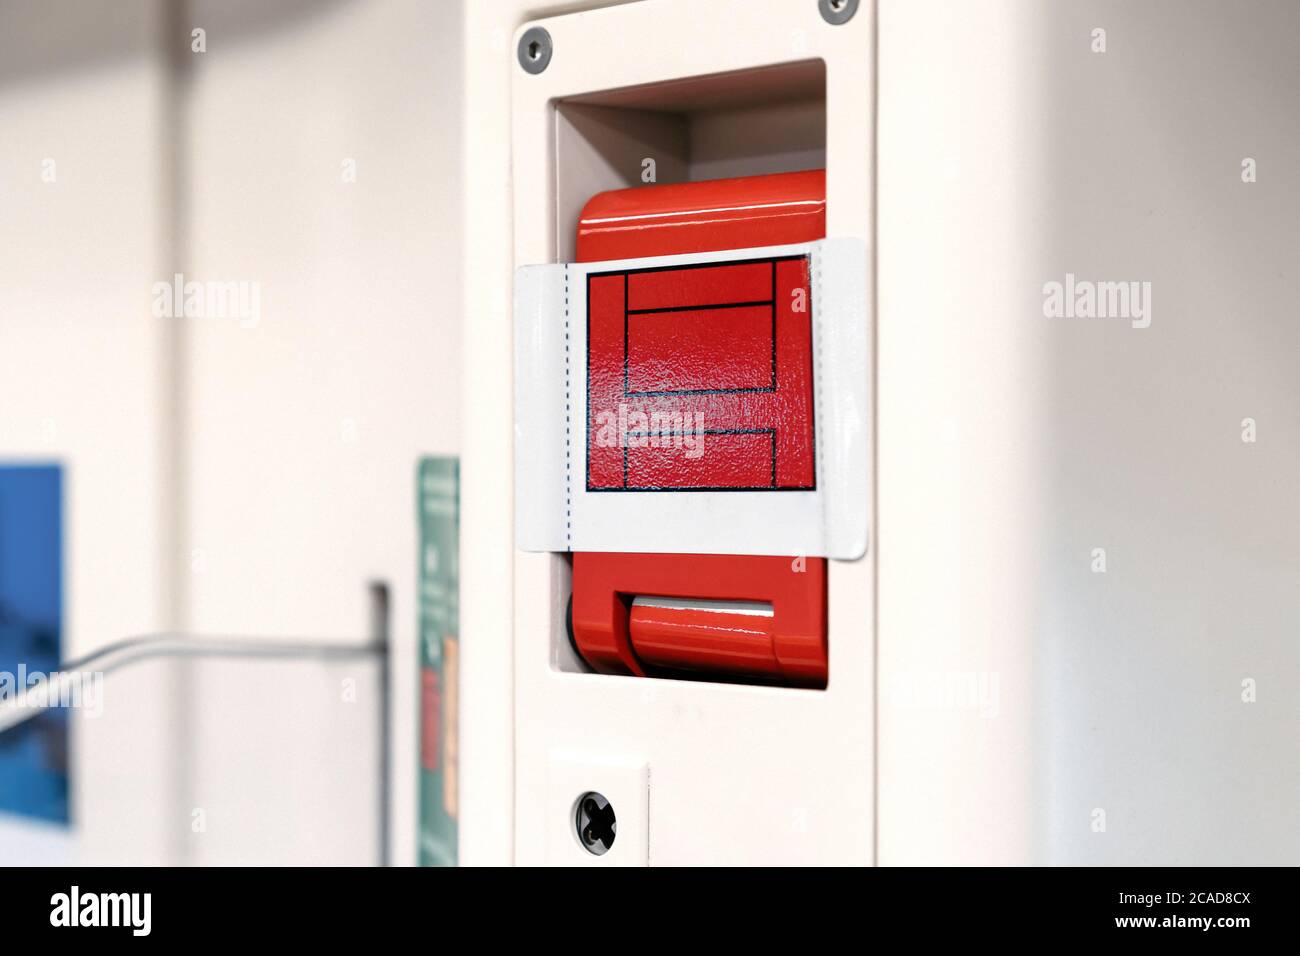 Red Button Set On White Stock Illustration - Download Image Now - Push  Button, Panic Button, Red - iStock